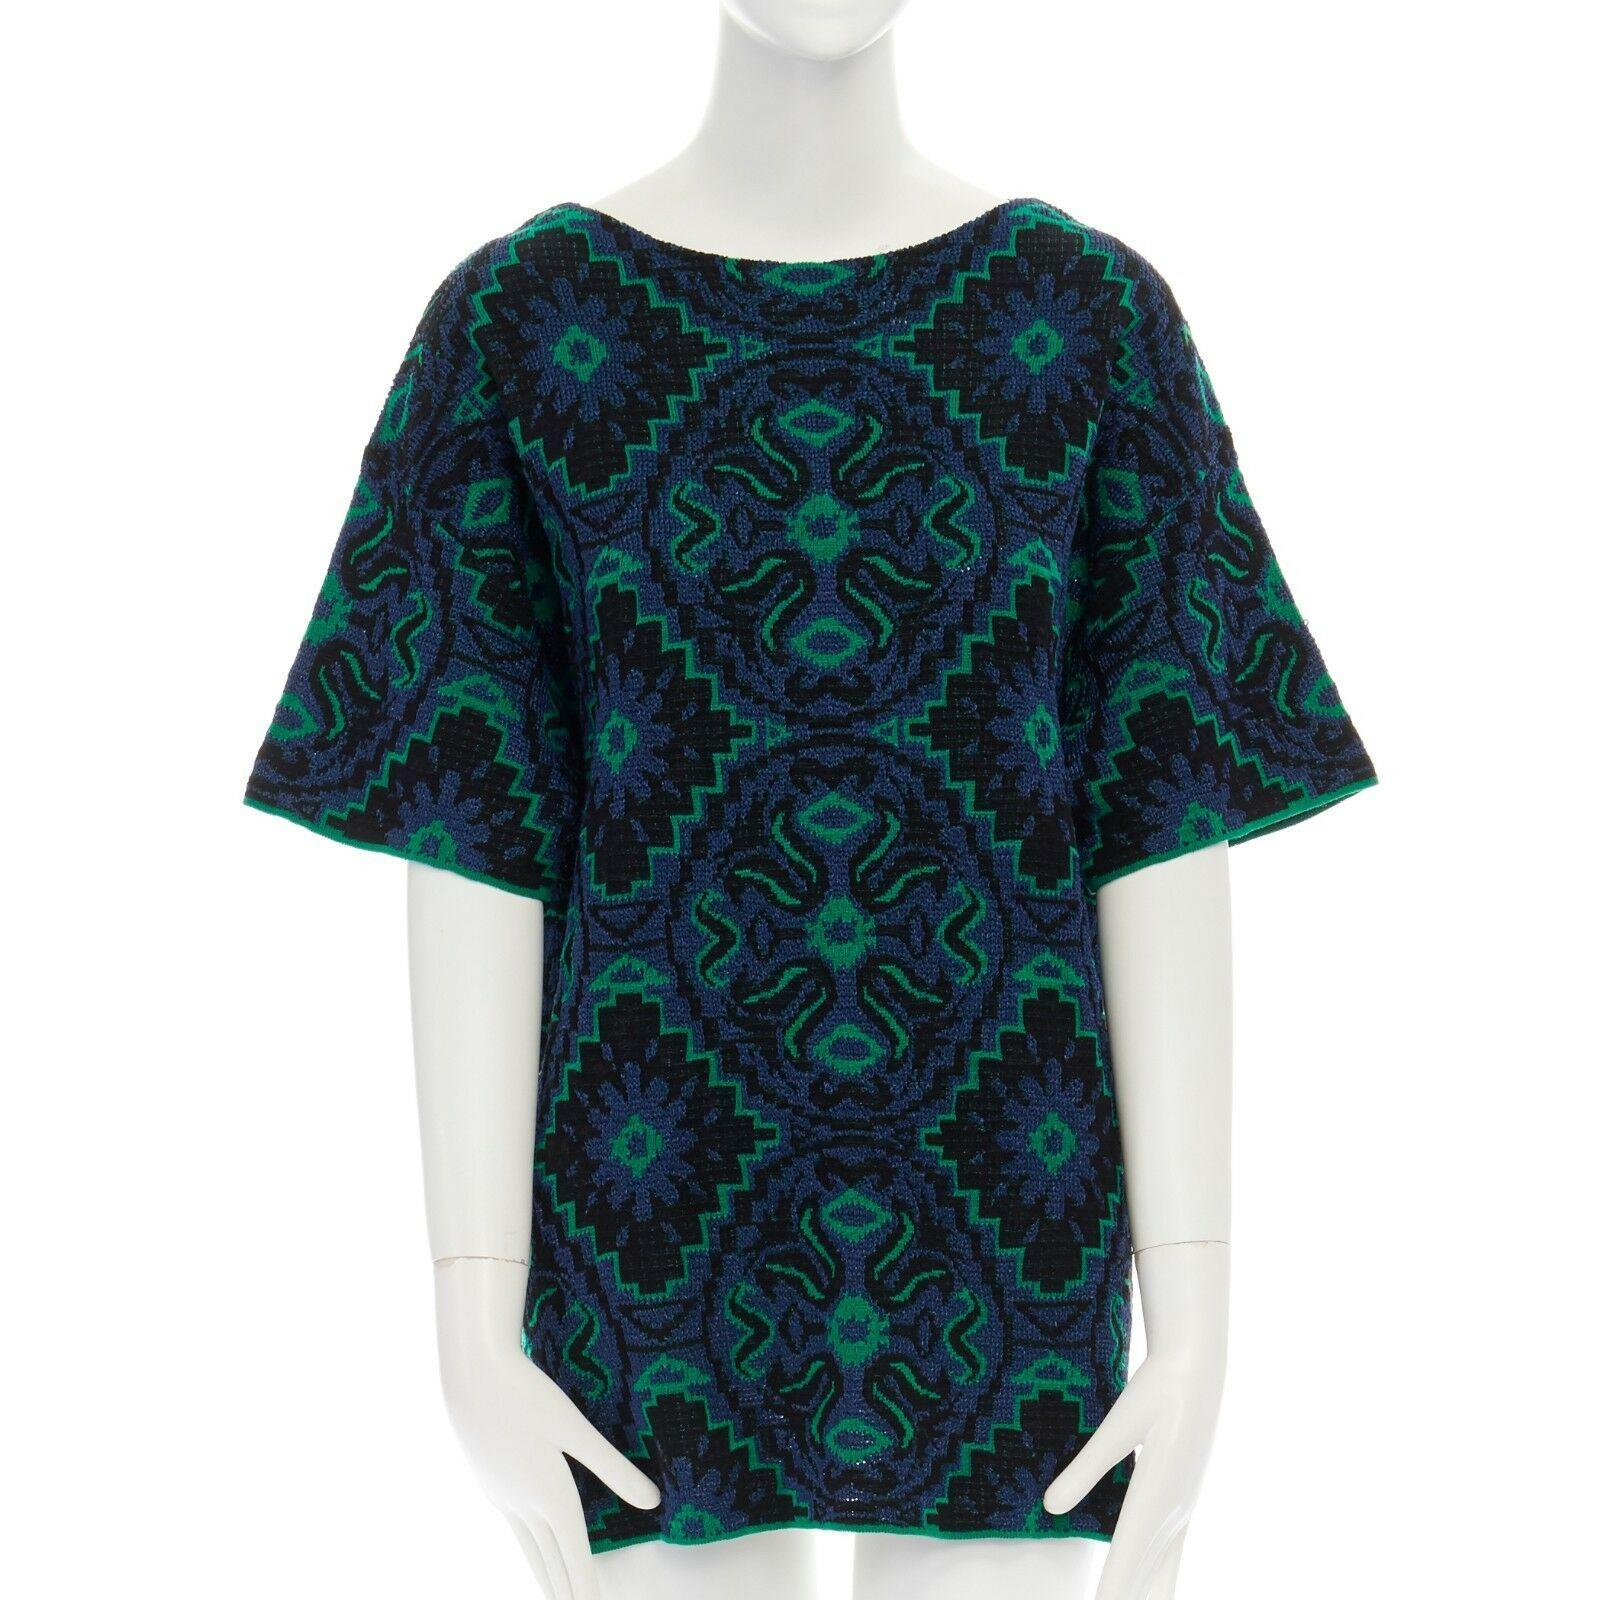 DRIES VAN NOTEN green blue ethnic jacquard knitted boxy short sleeve top M

DRIES VAN NOTEN
Cotton, polyester. Green, black and black ethnic jacquard. 
Stretch fit. Boxy fit top. 
Made in Belgium.

CONDITION
Very good, this item was pre-owned and is